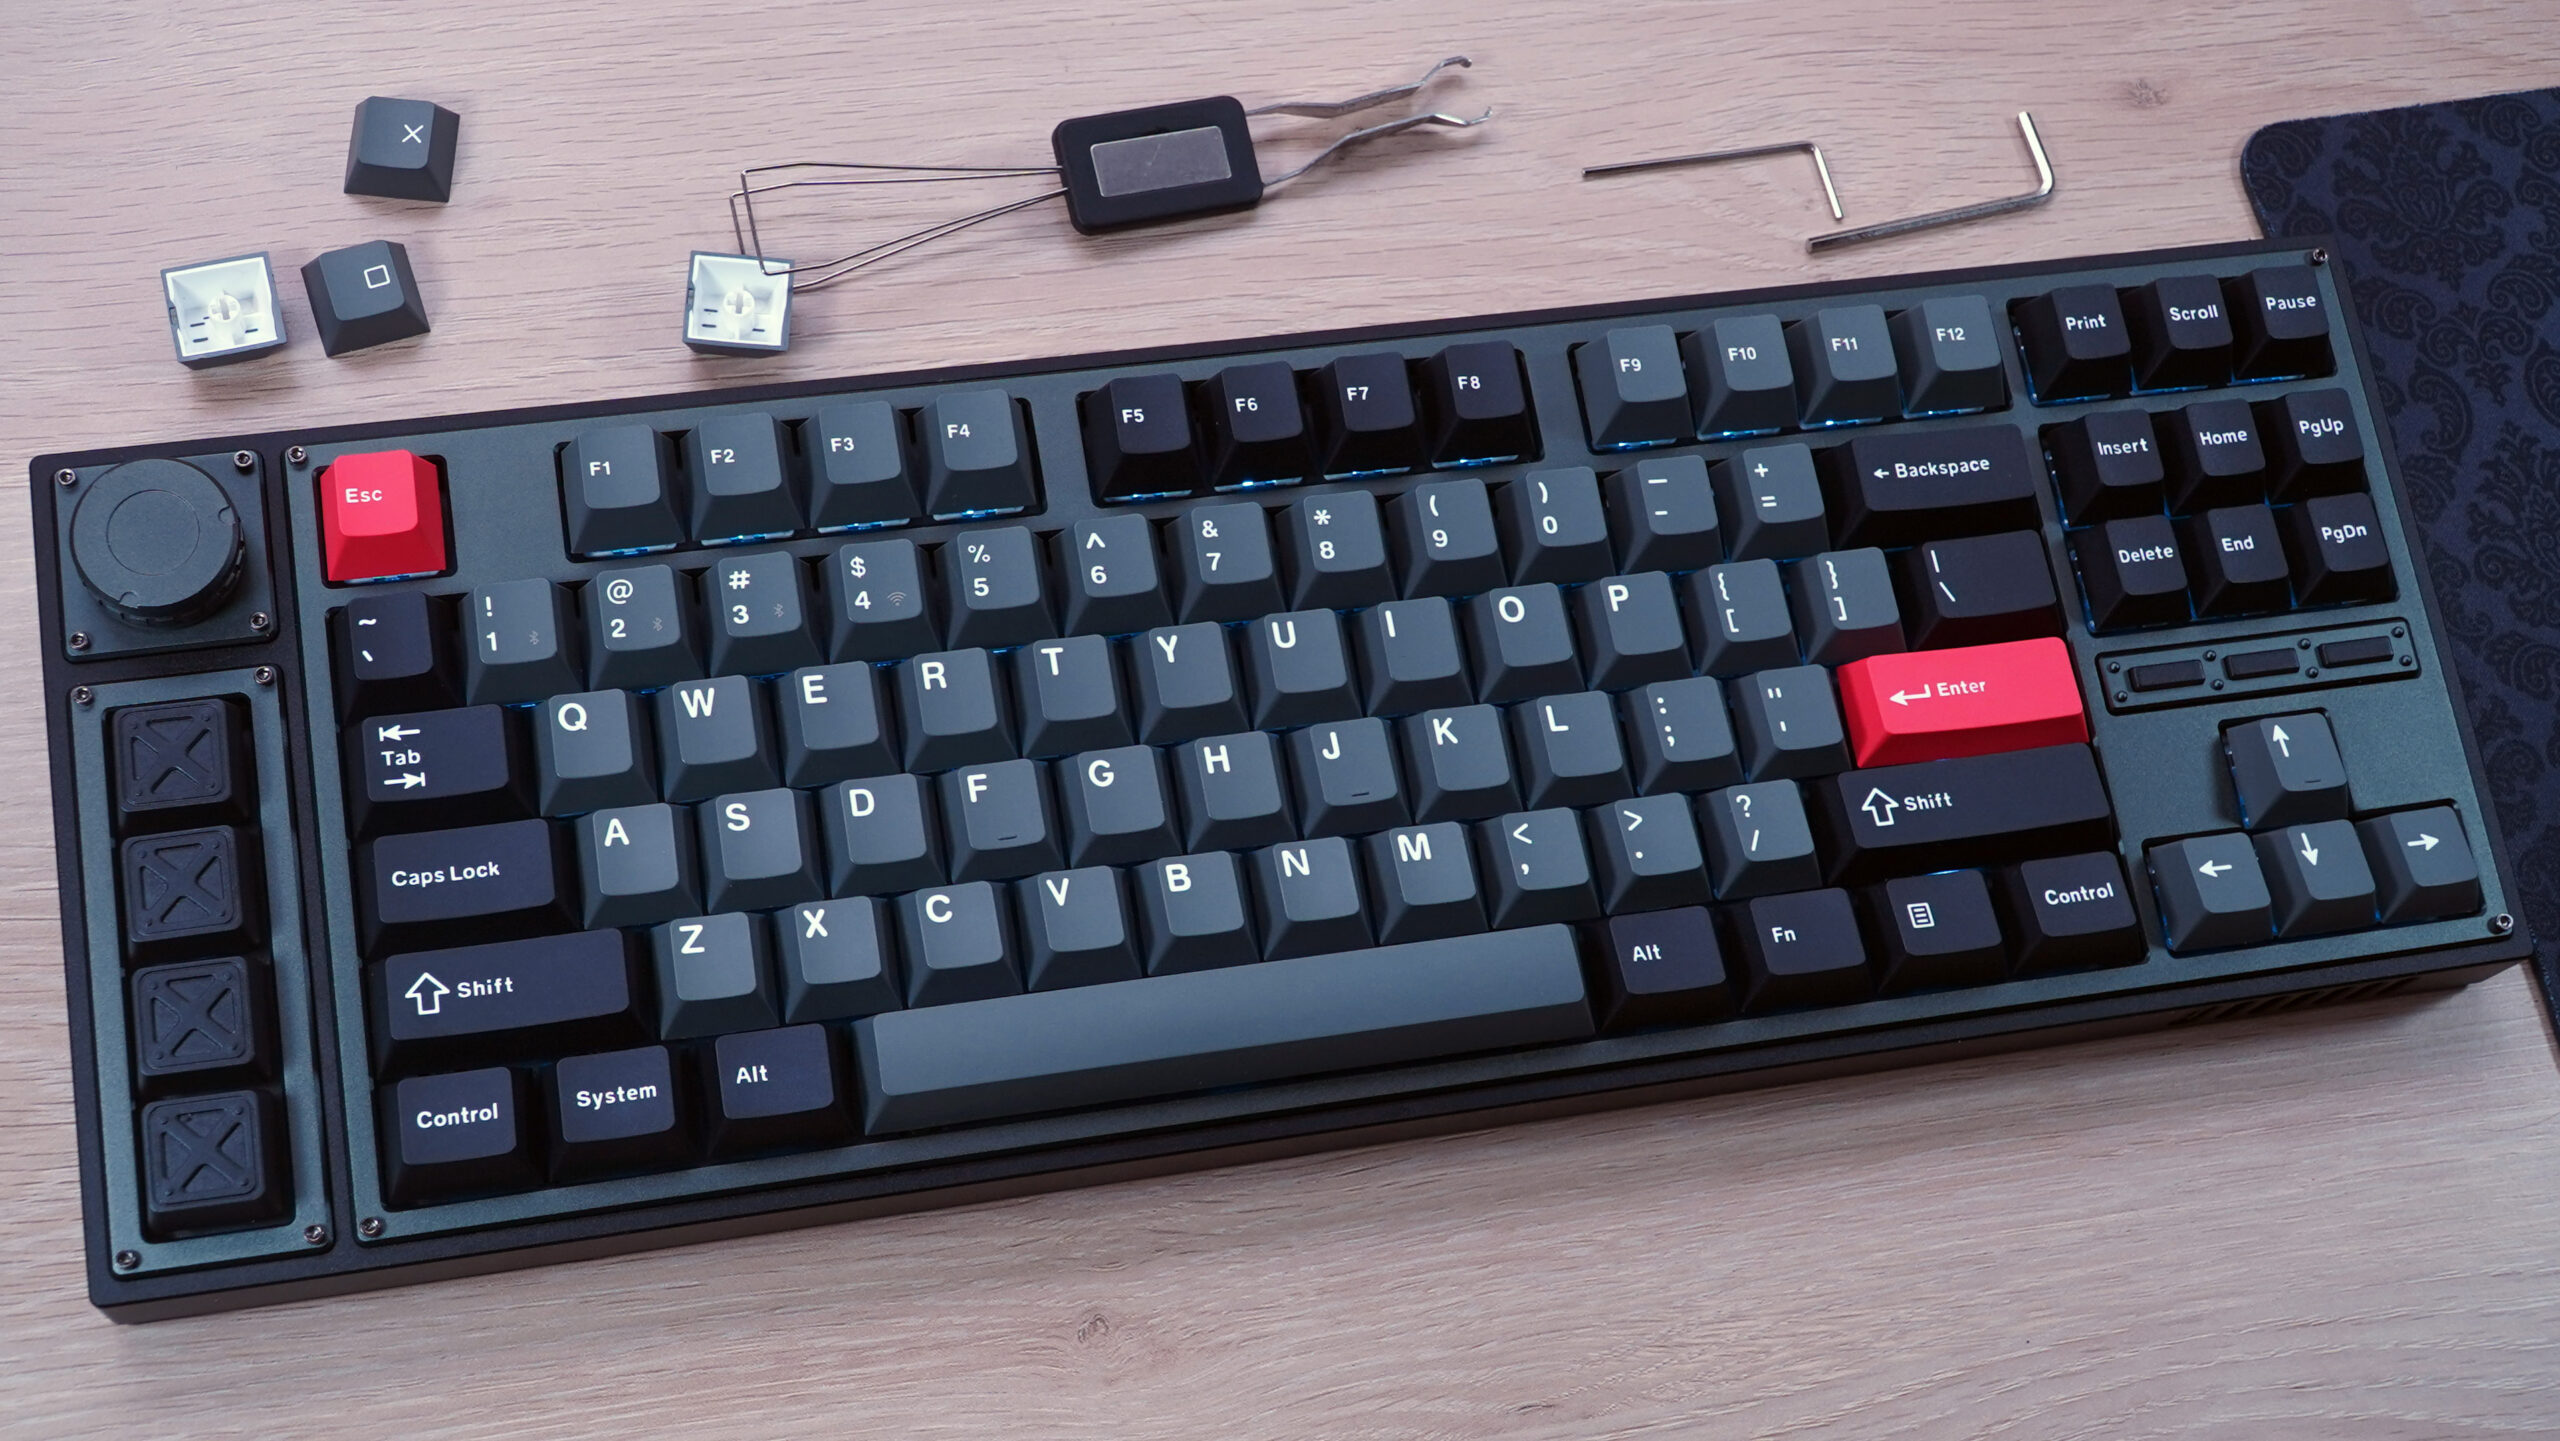 Lemokey L3 review: Keychron’s first gaming keyboard misses the mark